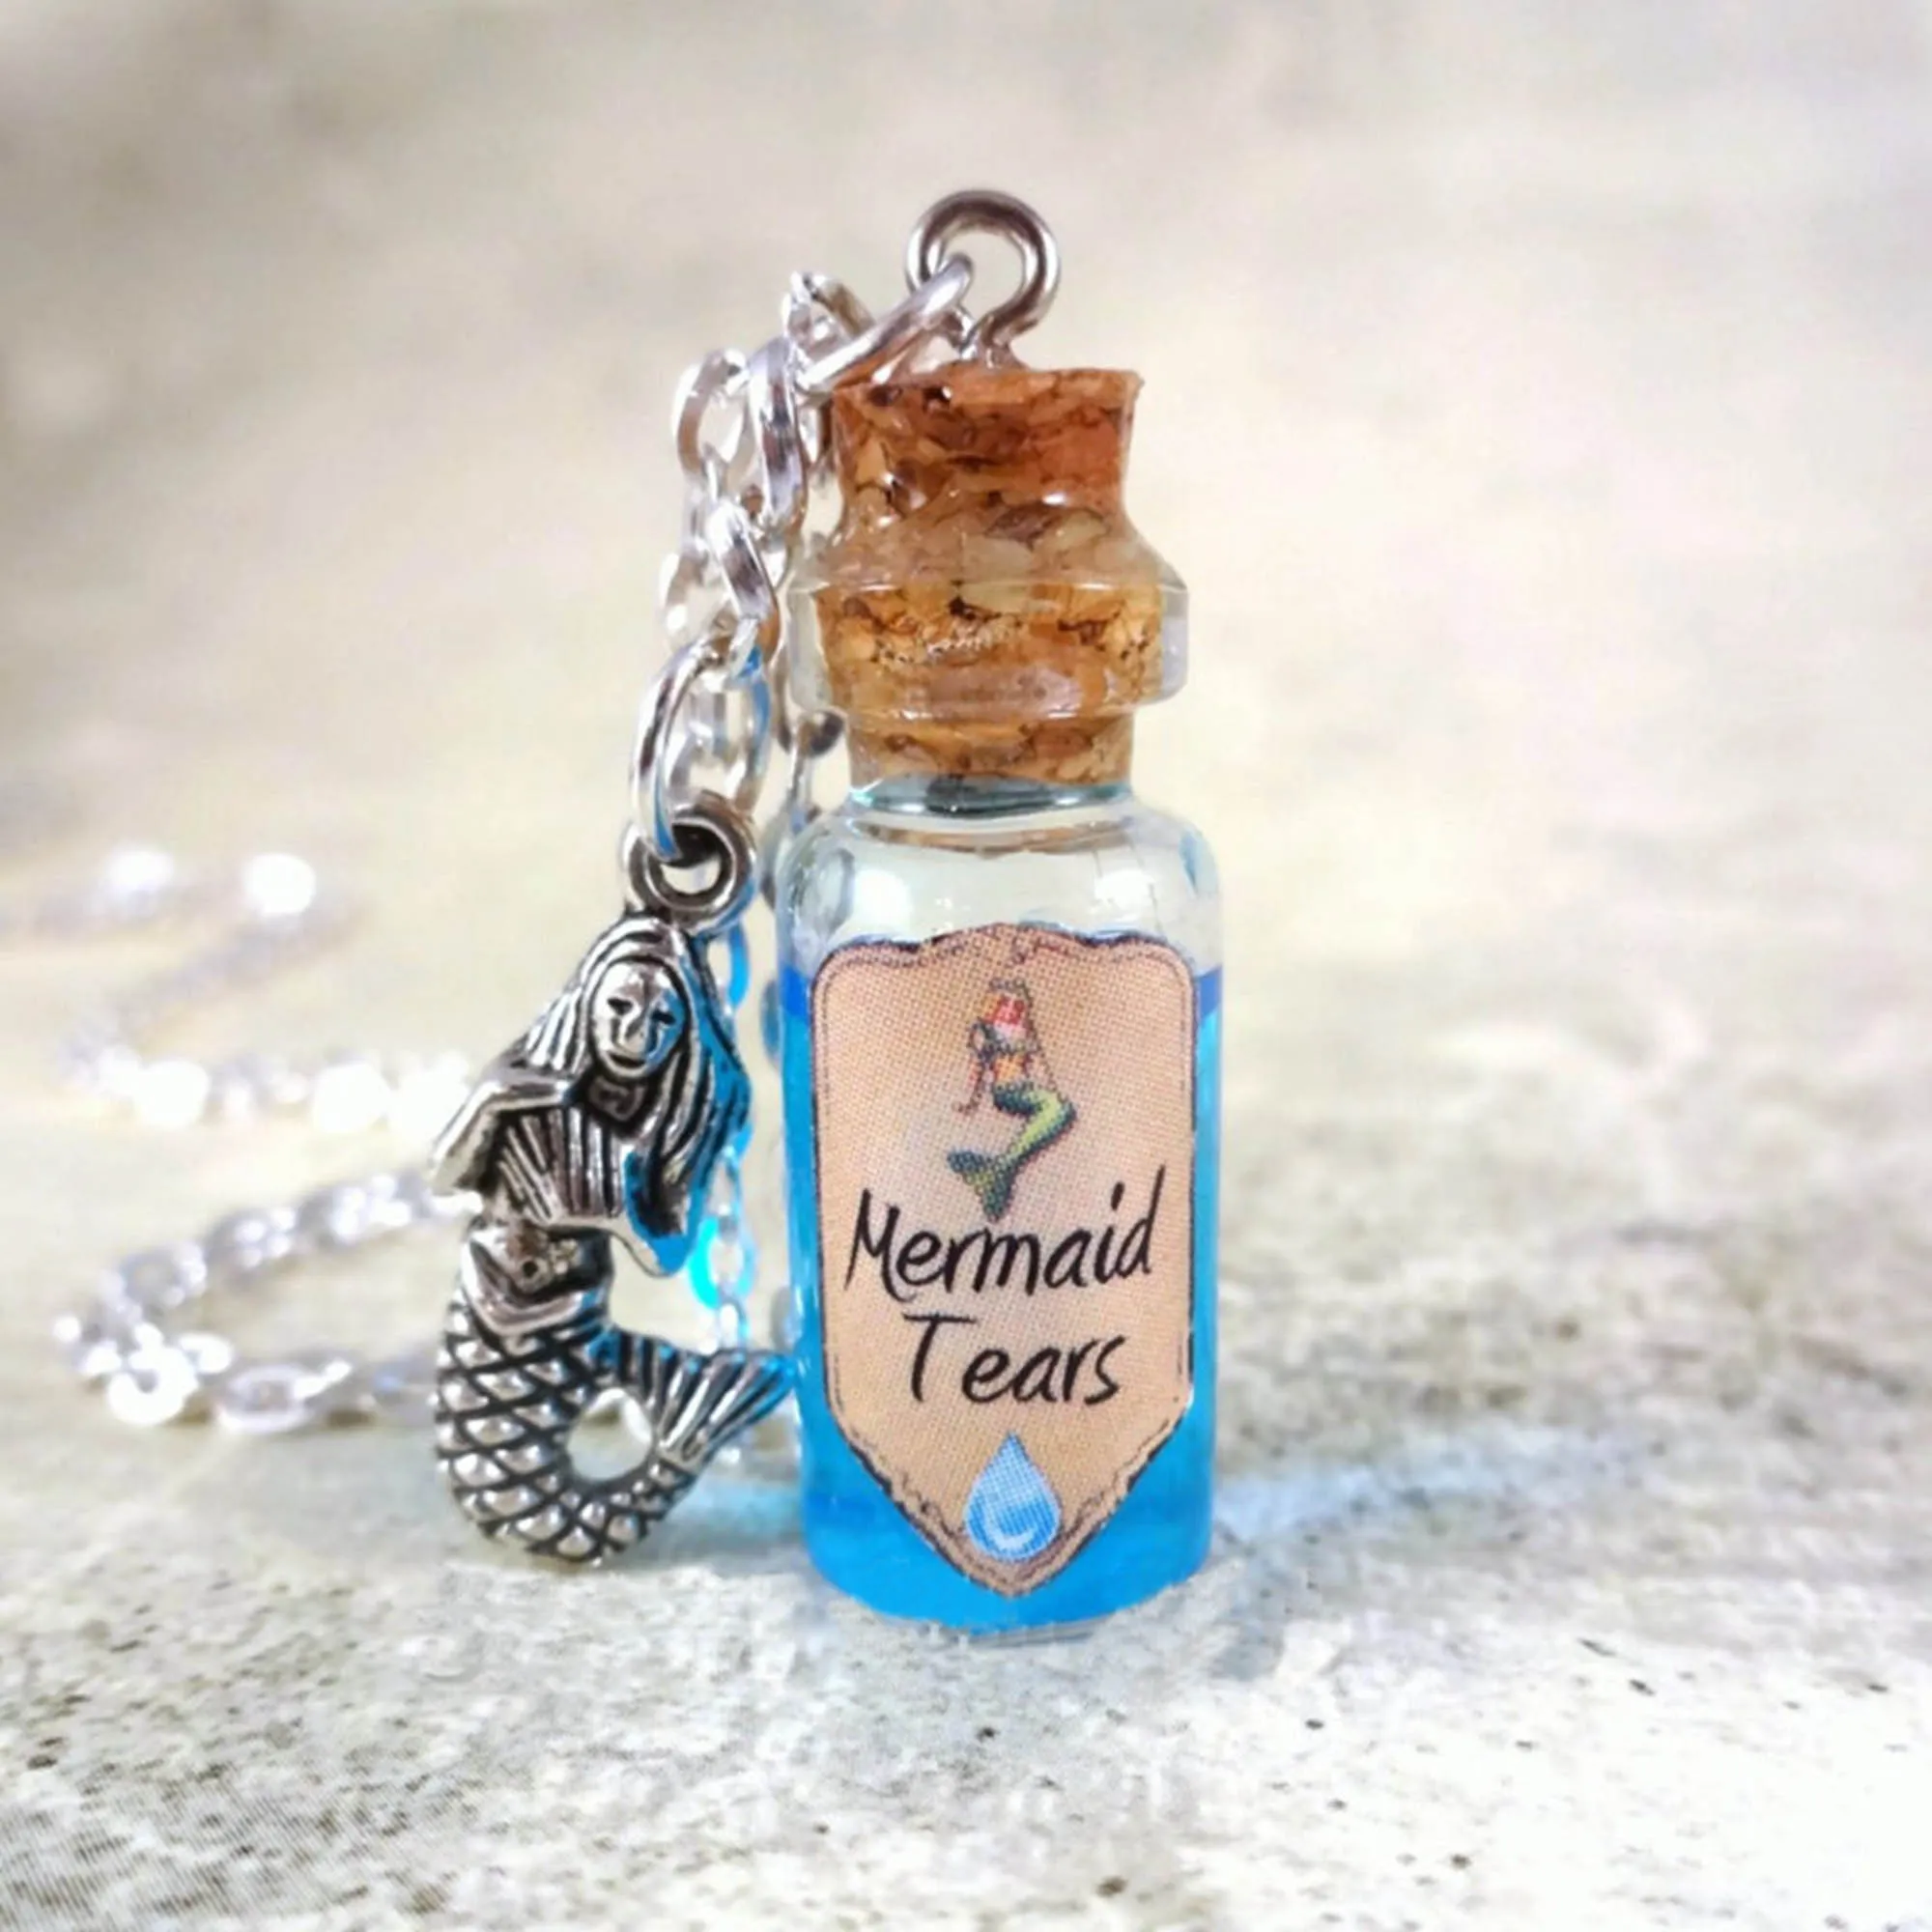 

Mermaid Tears Bottle Necklace Glass Bottle Cork Necklace Potion Vial Charm Blue Liquid Shimmer Magic Spells Once Upon a Time